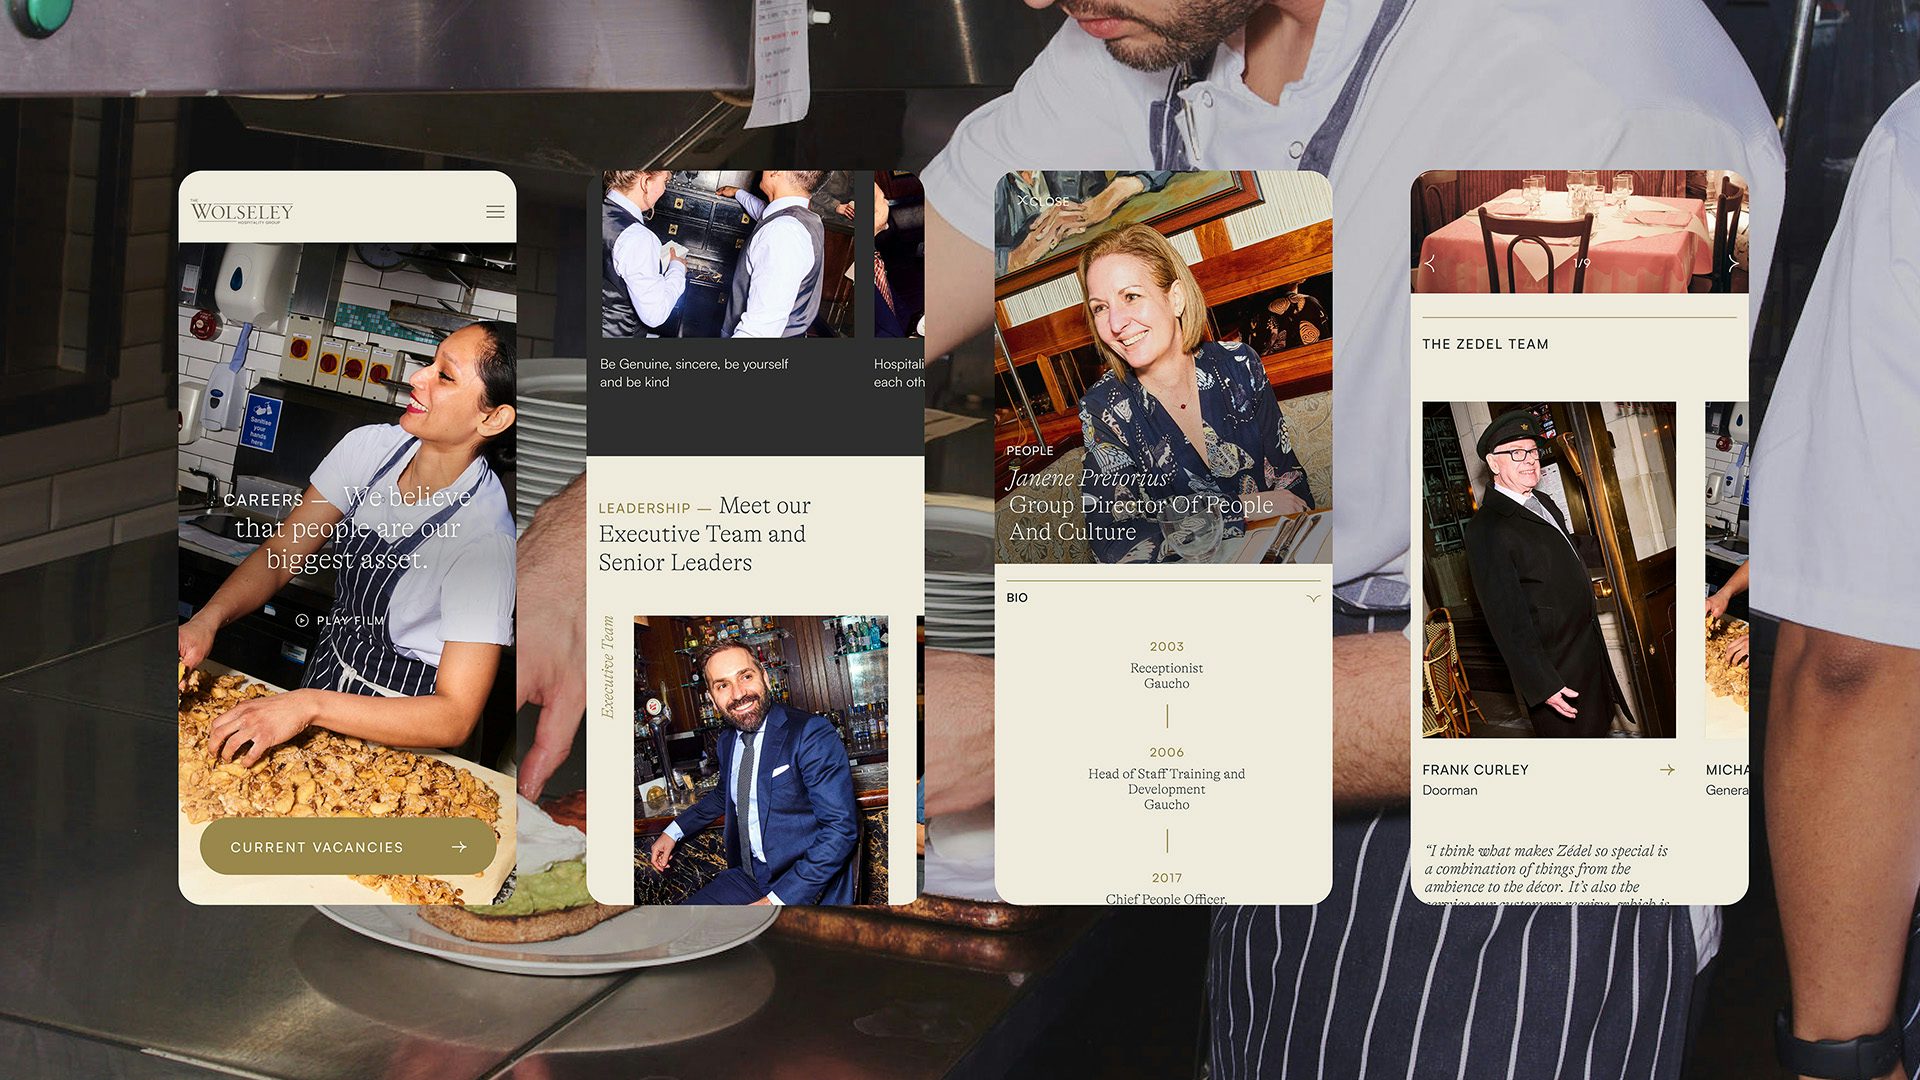 Image from the Wolseley's new digital identity showing three vertical website screenshots of its careers, leadership, and team pages, layered over the top of a photo of a chef preparing a plate of food